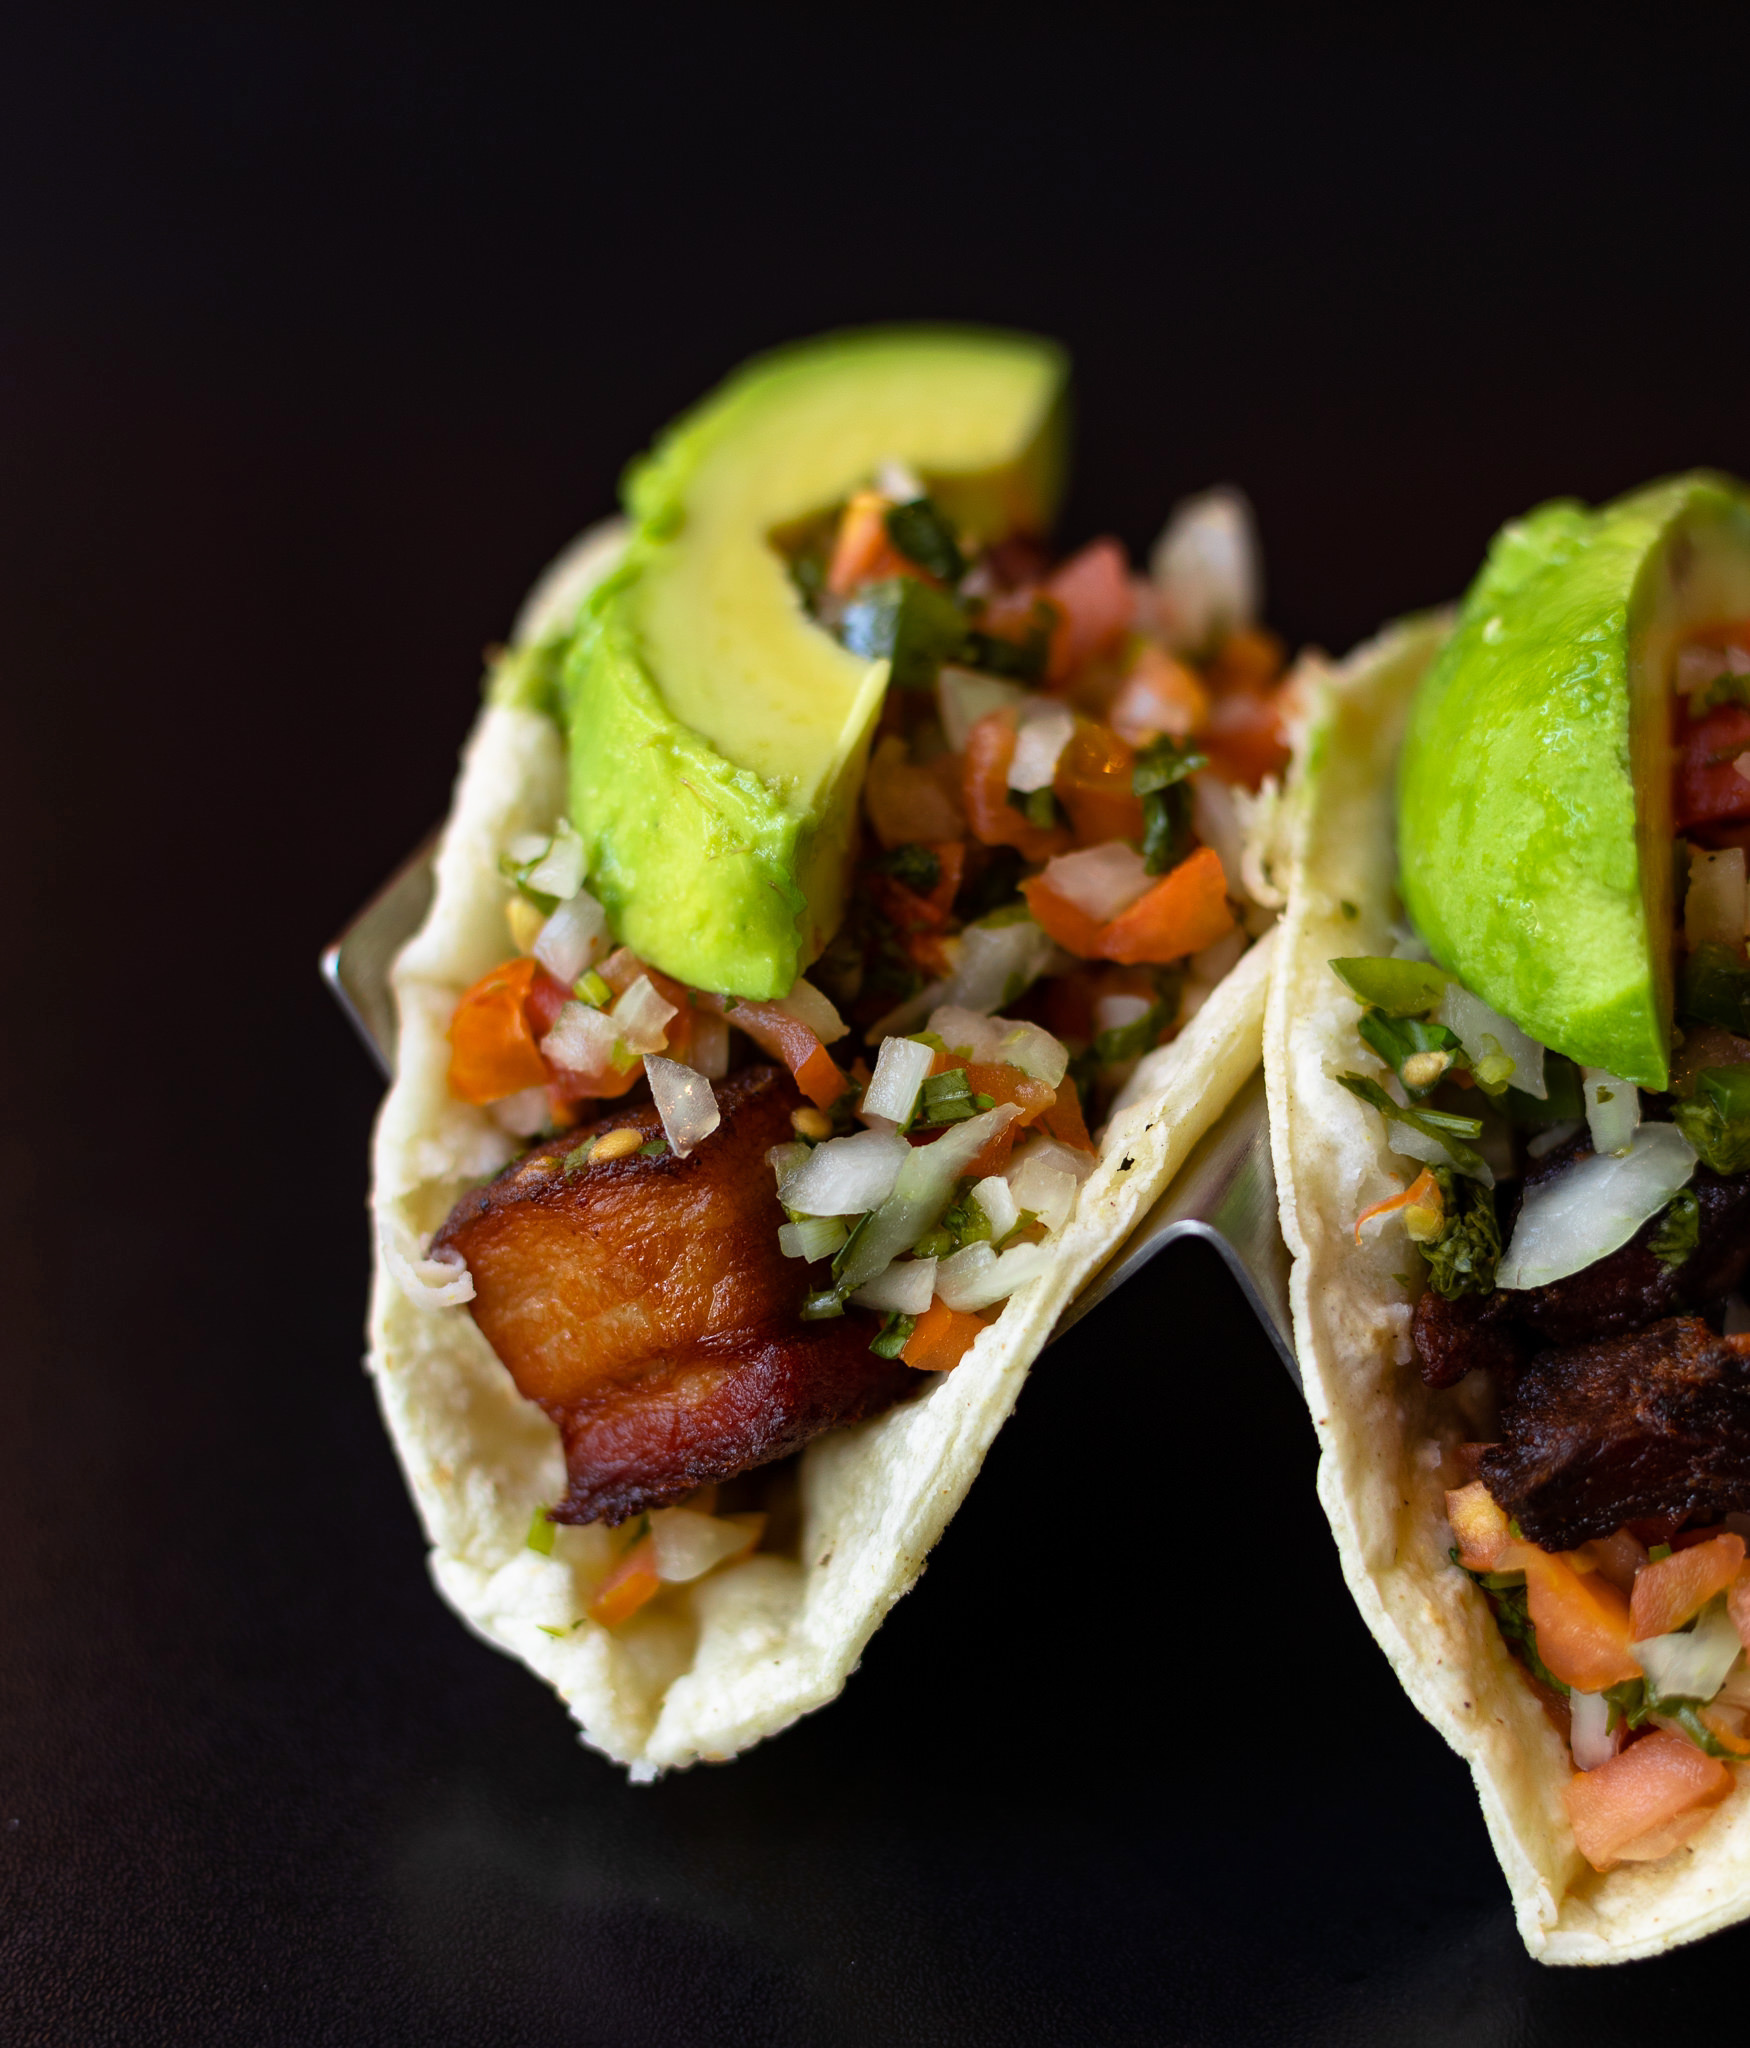 423 Taco brings tacos and tequila to Chattanooga's West Village